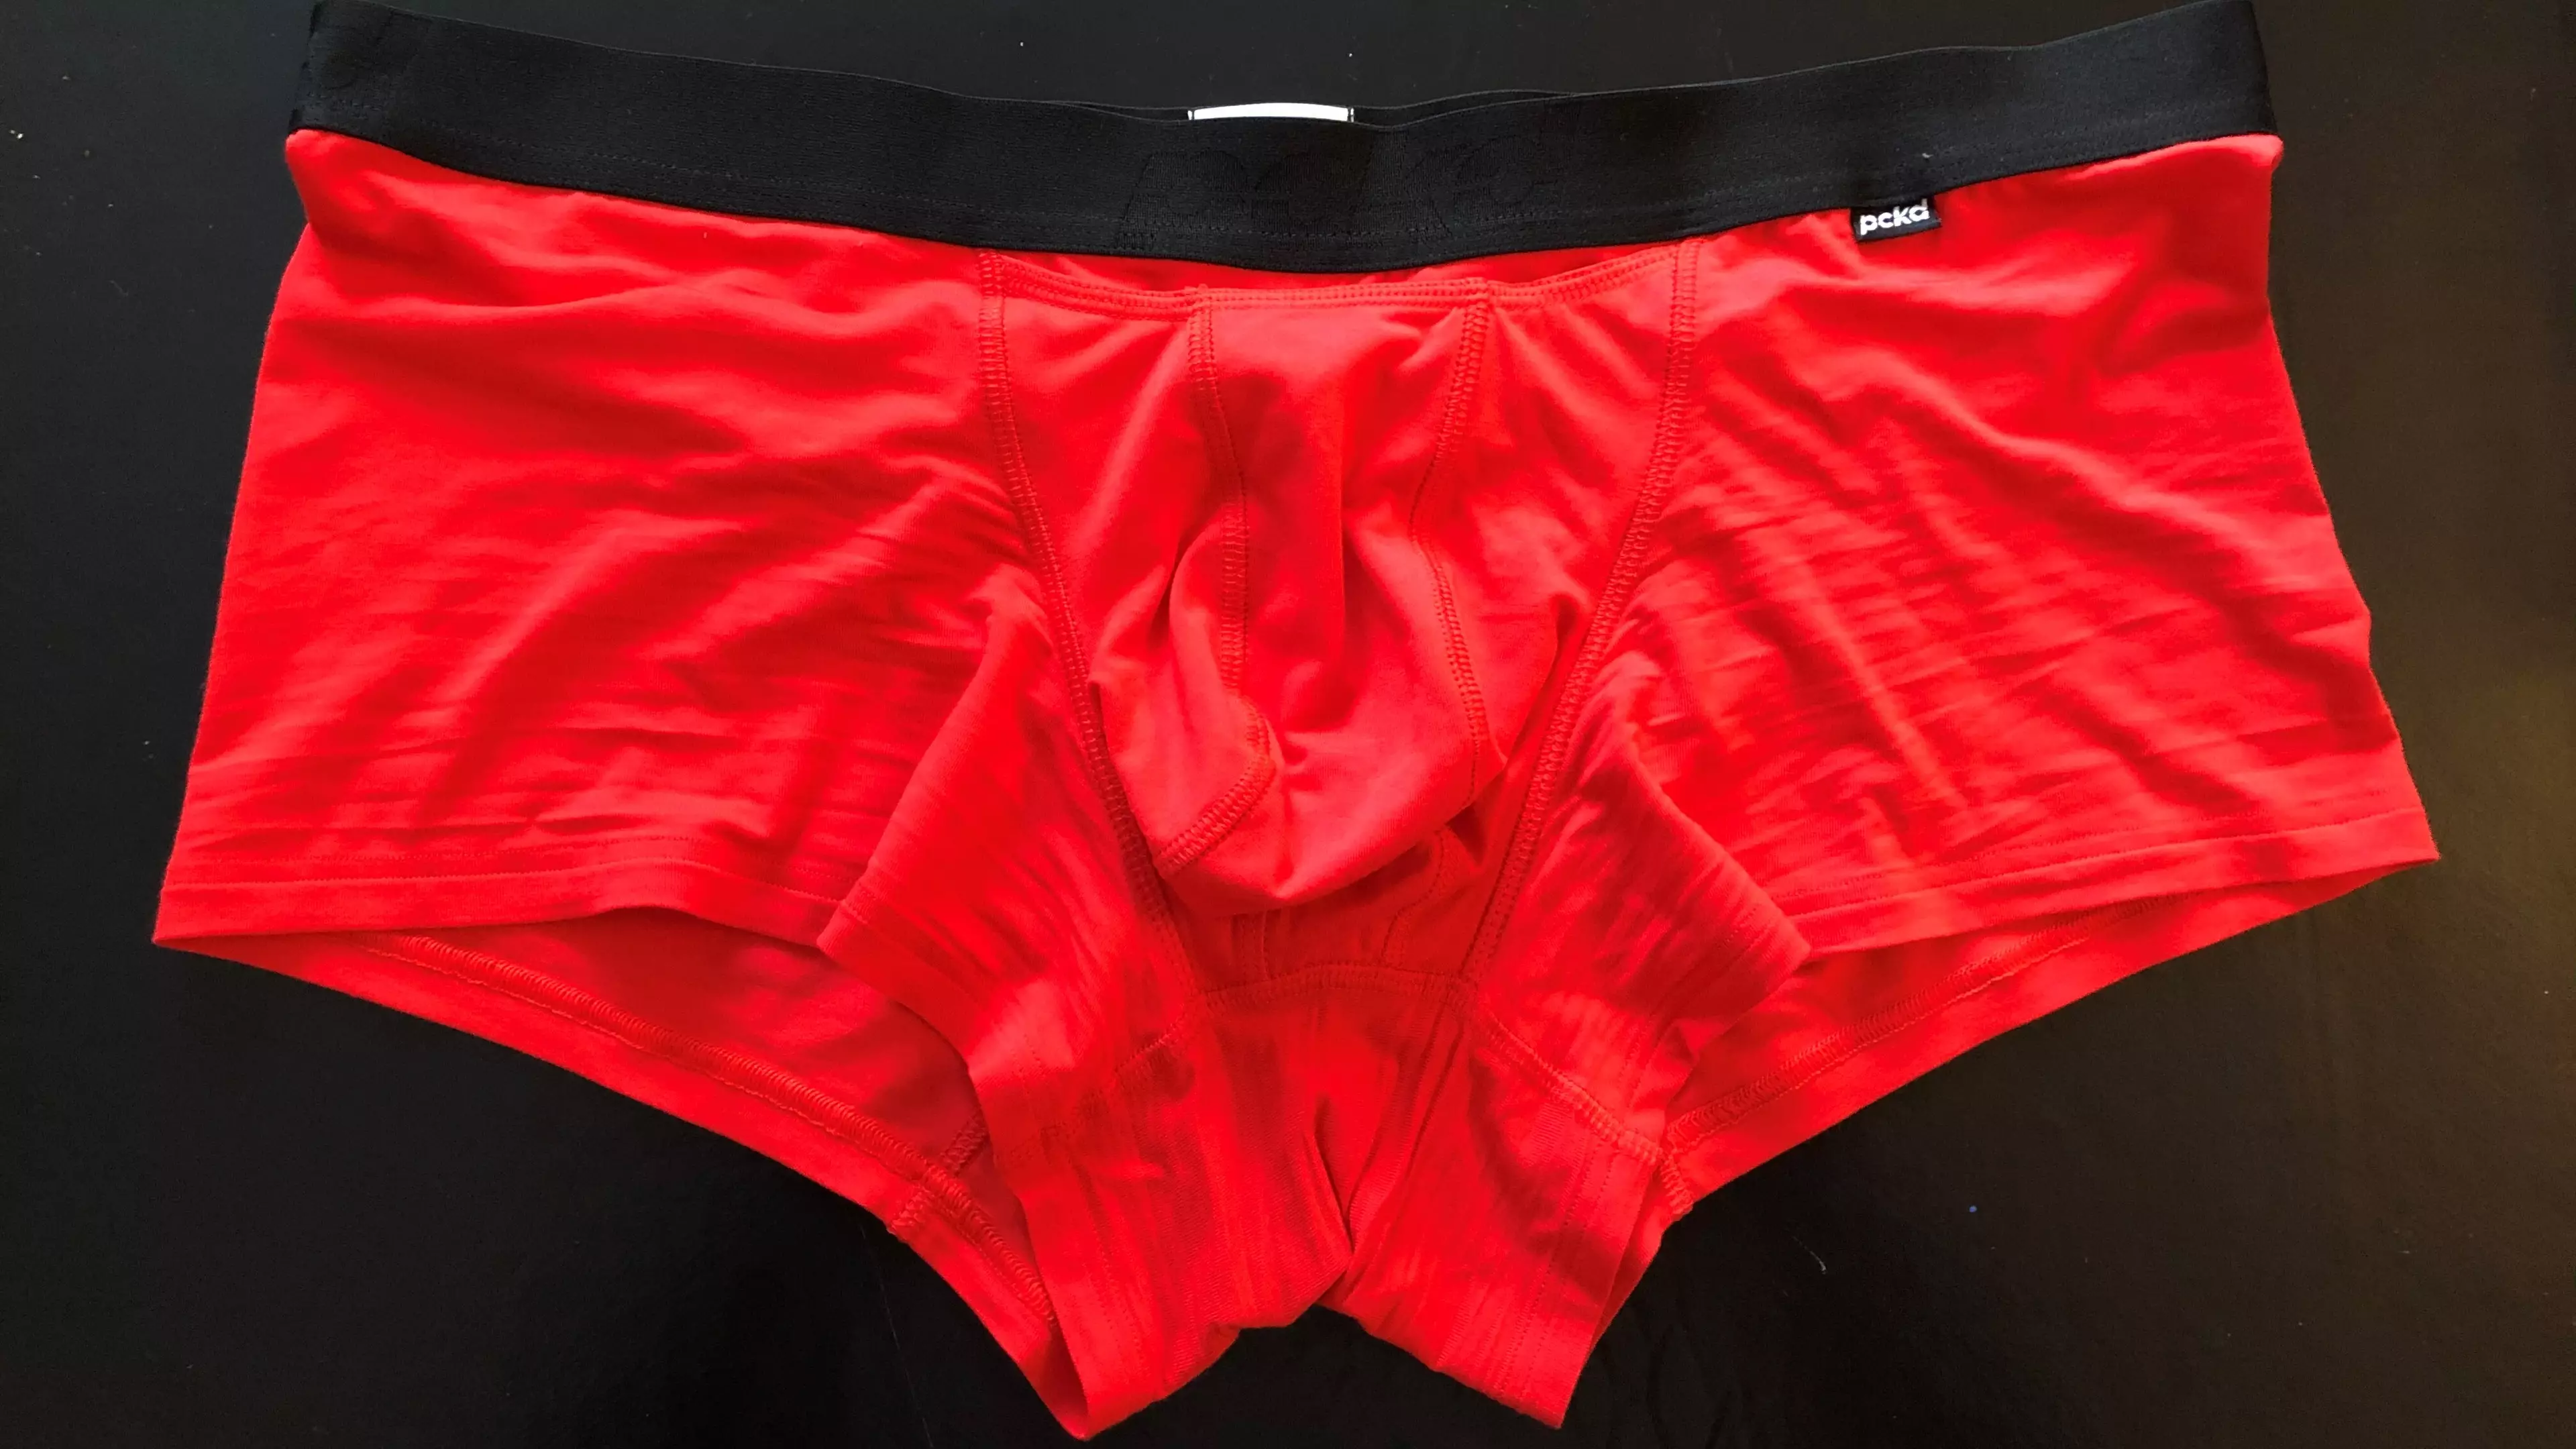 ​Man Sparks Debate After Claiming All Men Wear Underwear 3-10 Times Without Washing It